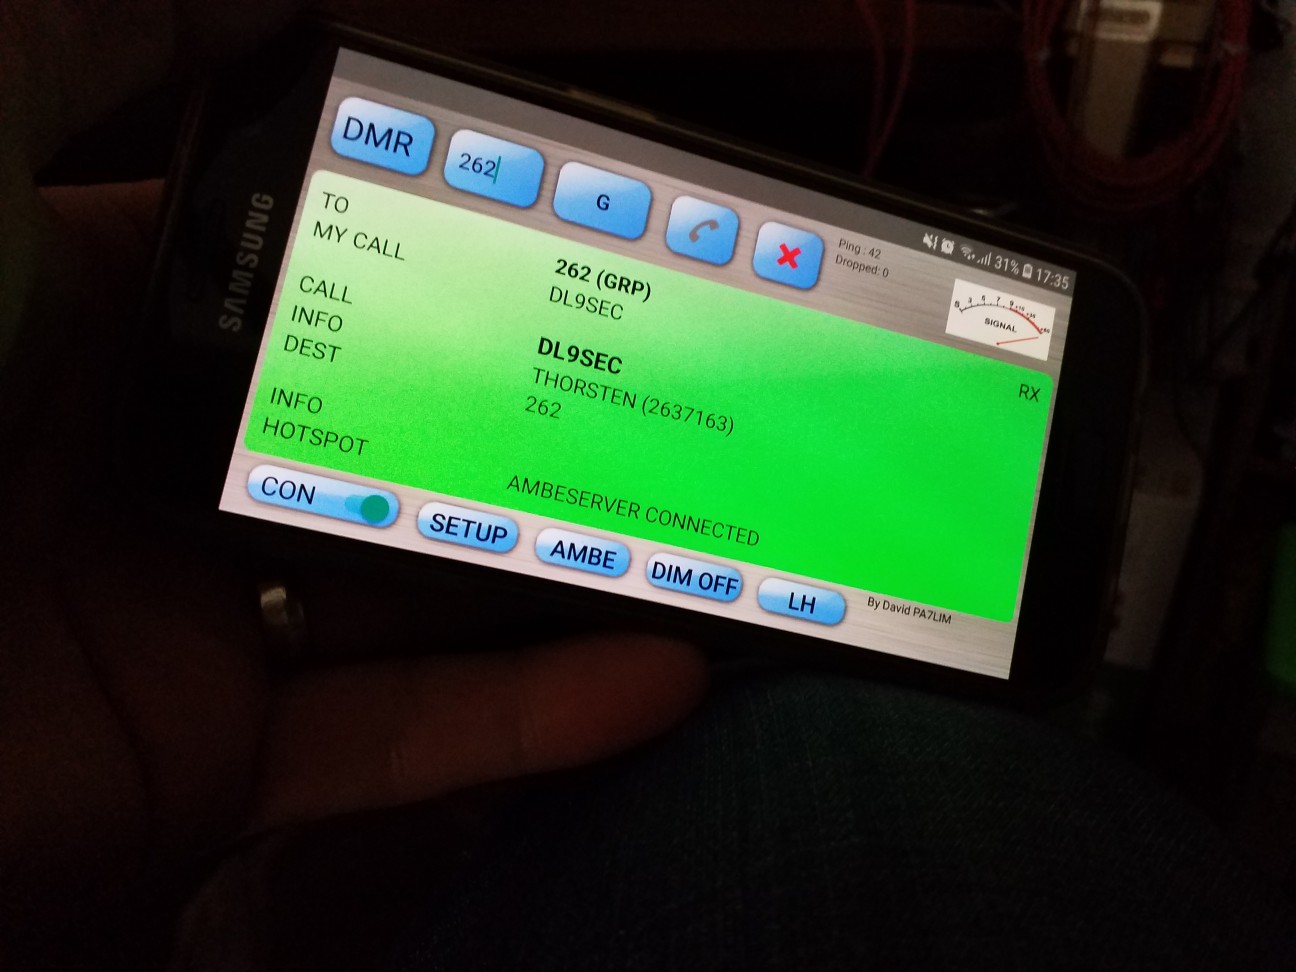 DMR with the mobile phone and AMBEserver